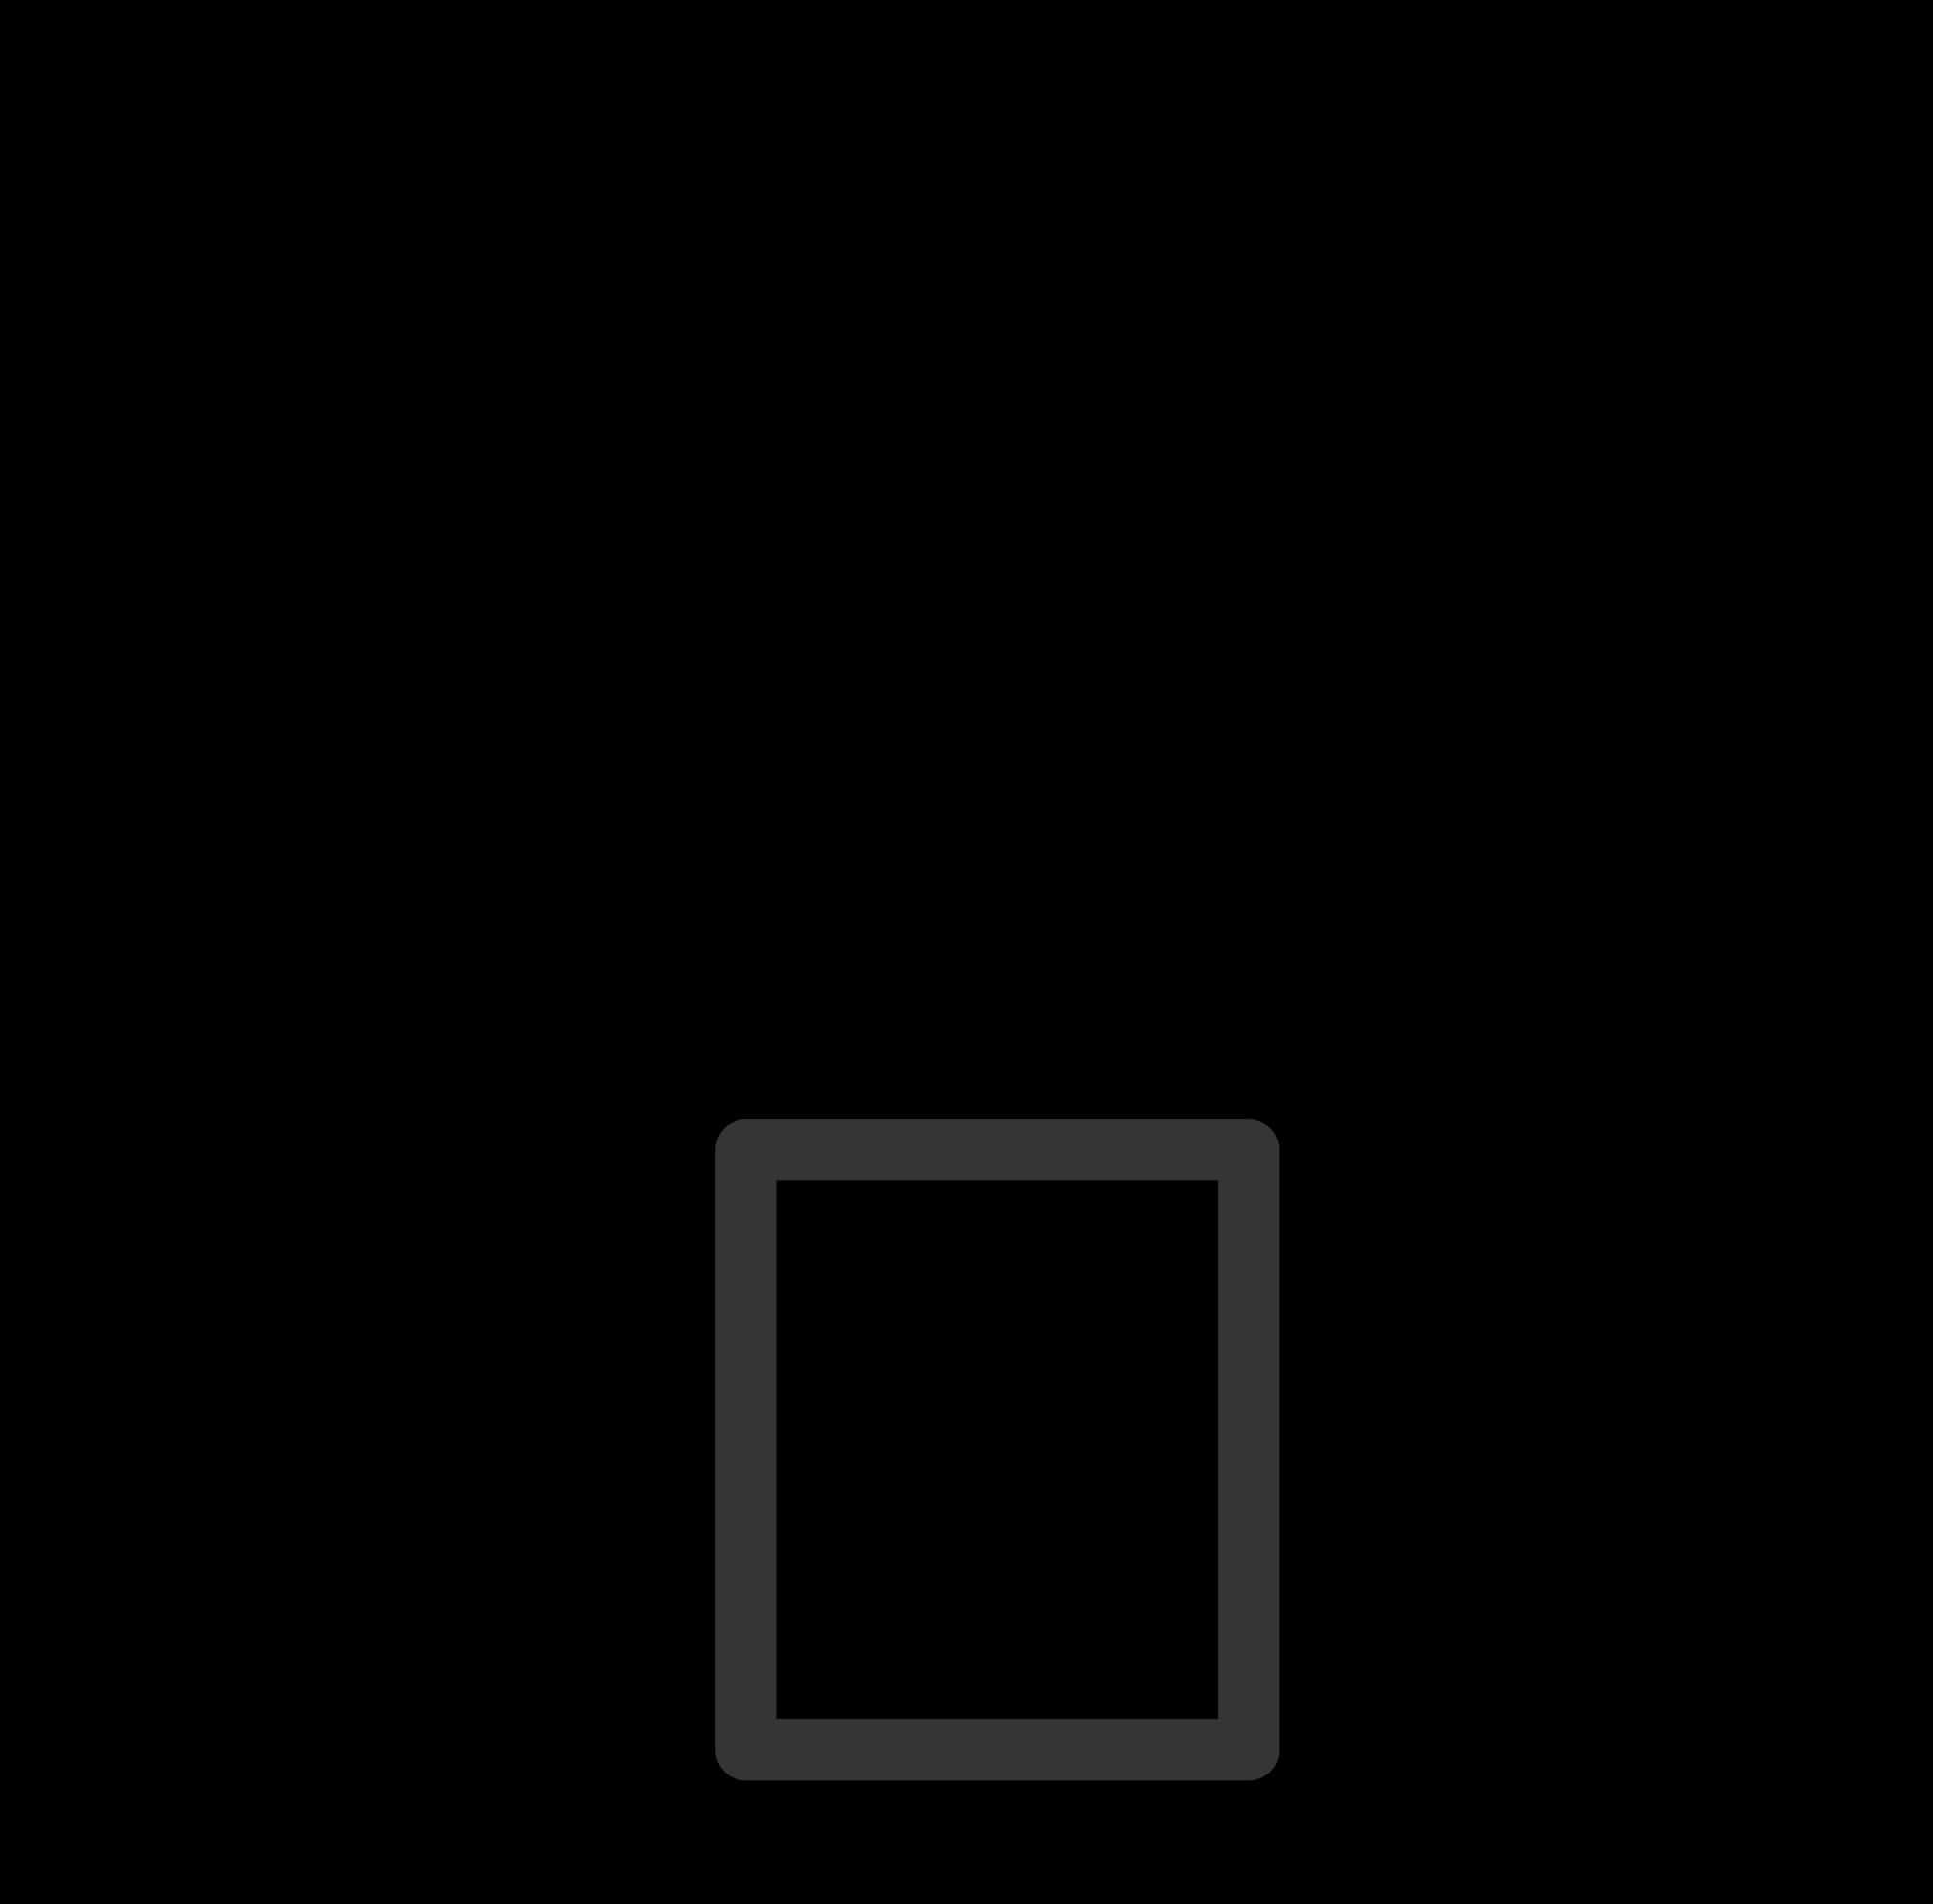 A Black Square With A Black Background